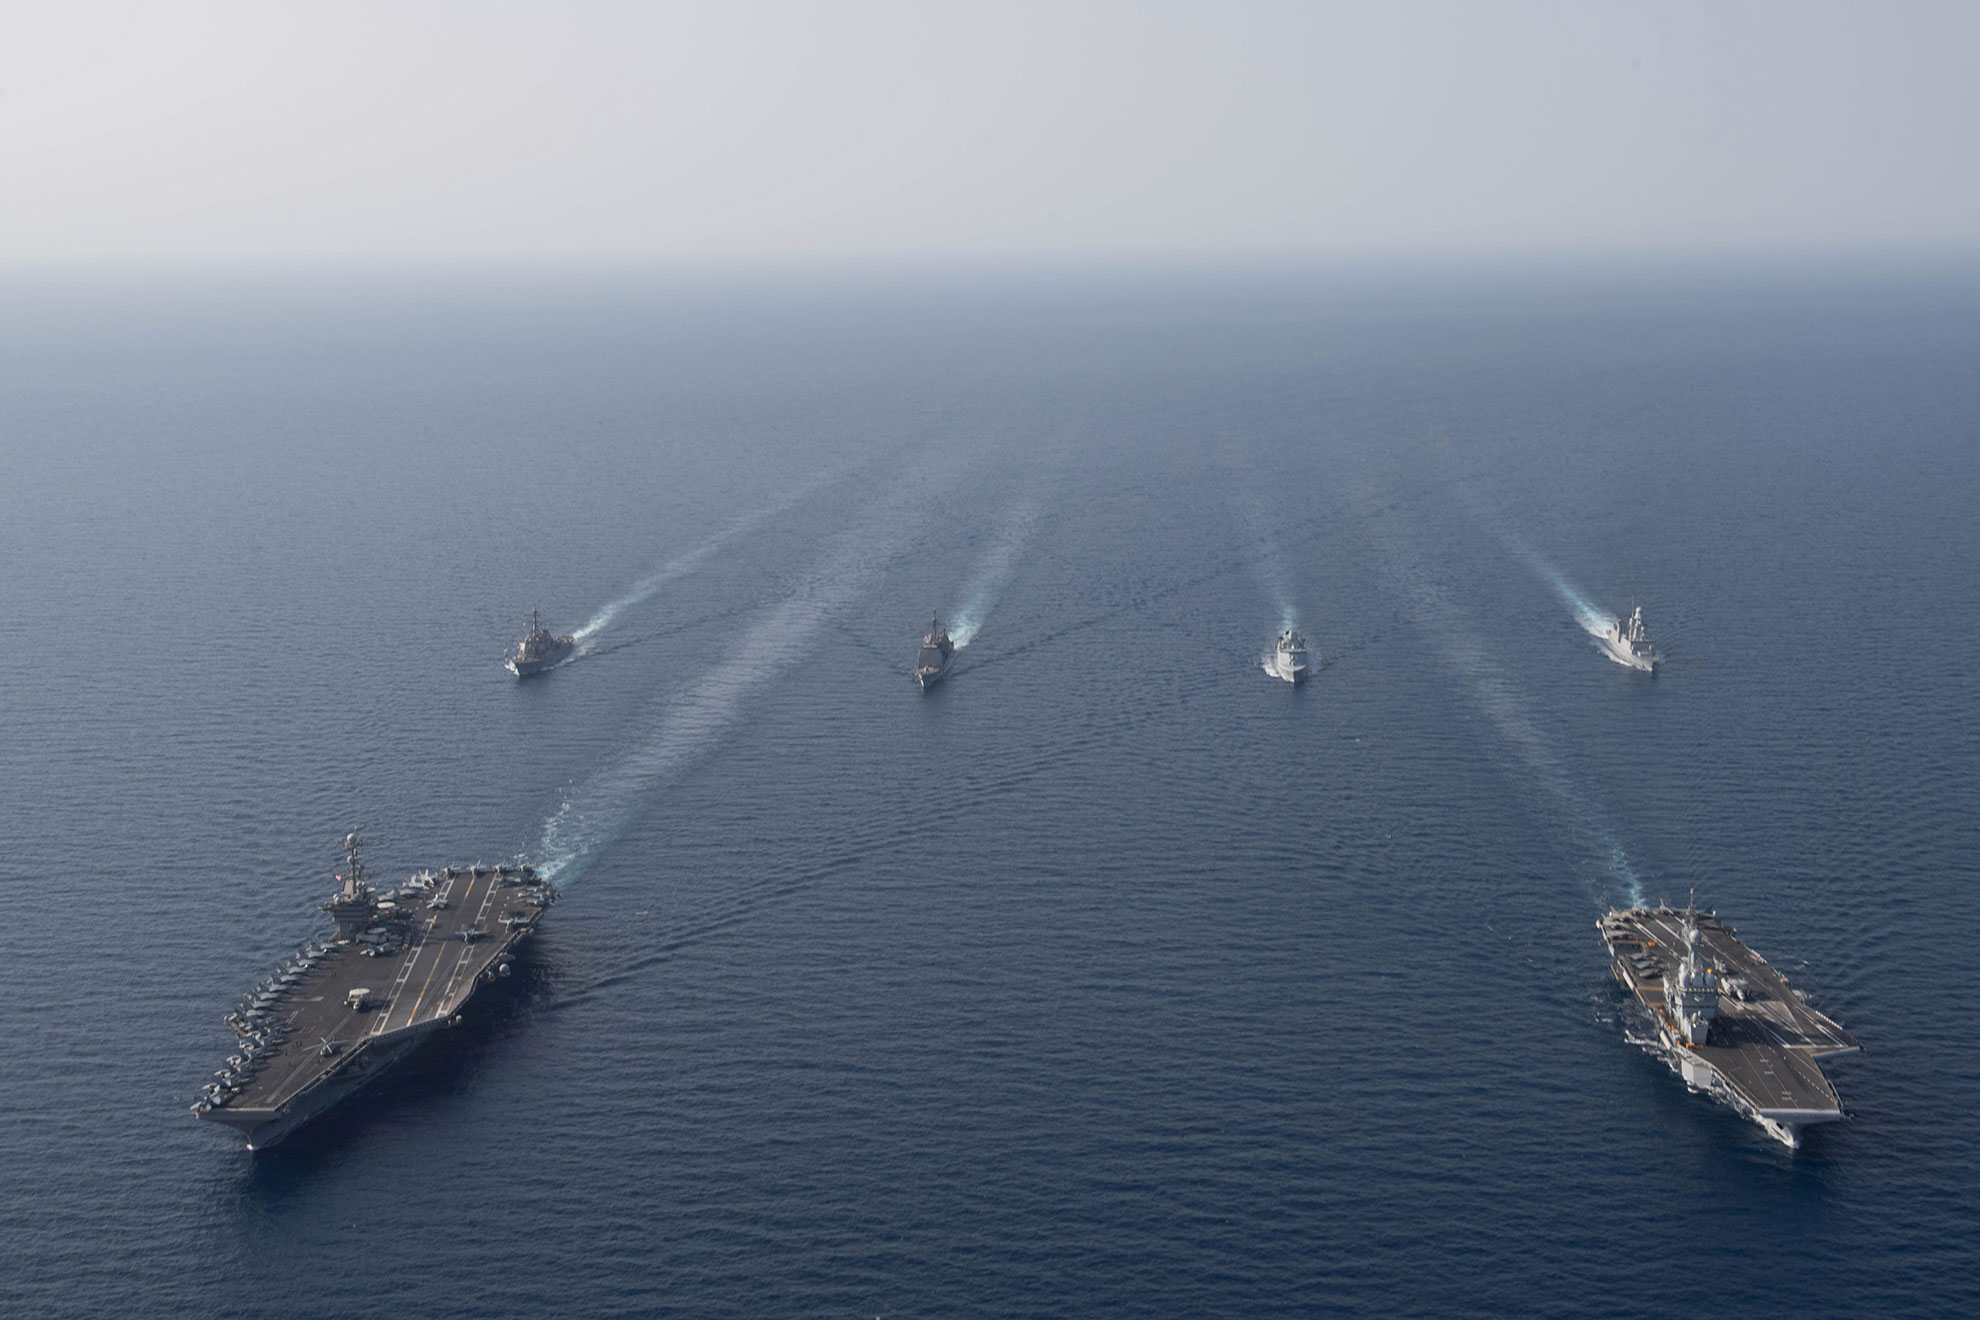 Red Sea (April 15, 2019) The aircraft carrier USS John C. Stennis (CVN 74), front left, the French Marine Nationale aircraft carrier FS Charles de Gaulle (F 91), front right, the guided-missile destroyer USS McFaul (DDG 74), the guided-missile cruiser USS Mobile Bay (CG 53), the Royal Danish Navy frigate HDMS Niels Juel (F 363) and the French F70AA-class air defense destroyer FS Forbin (D 620) are underway in formation in the Red Sea, April 15, 2019. The John C. Stennis Carrier Strike Group is deployed to the U.S. 5th Fleet area of operations in support of naval operations to ensure maritime stability and security in the Central Region, connecting the Mediterranean and the Pacific through the western Indian Ocean and three strategic choke points. (U.S. Navy photo by Mass Communication Specialist Seaman Joshua L. Leonard. -